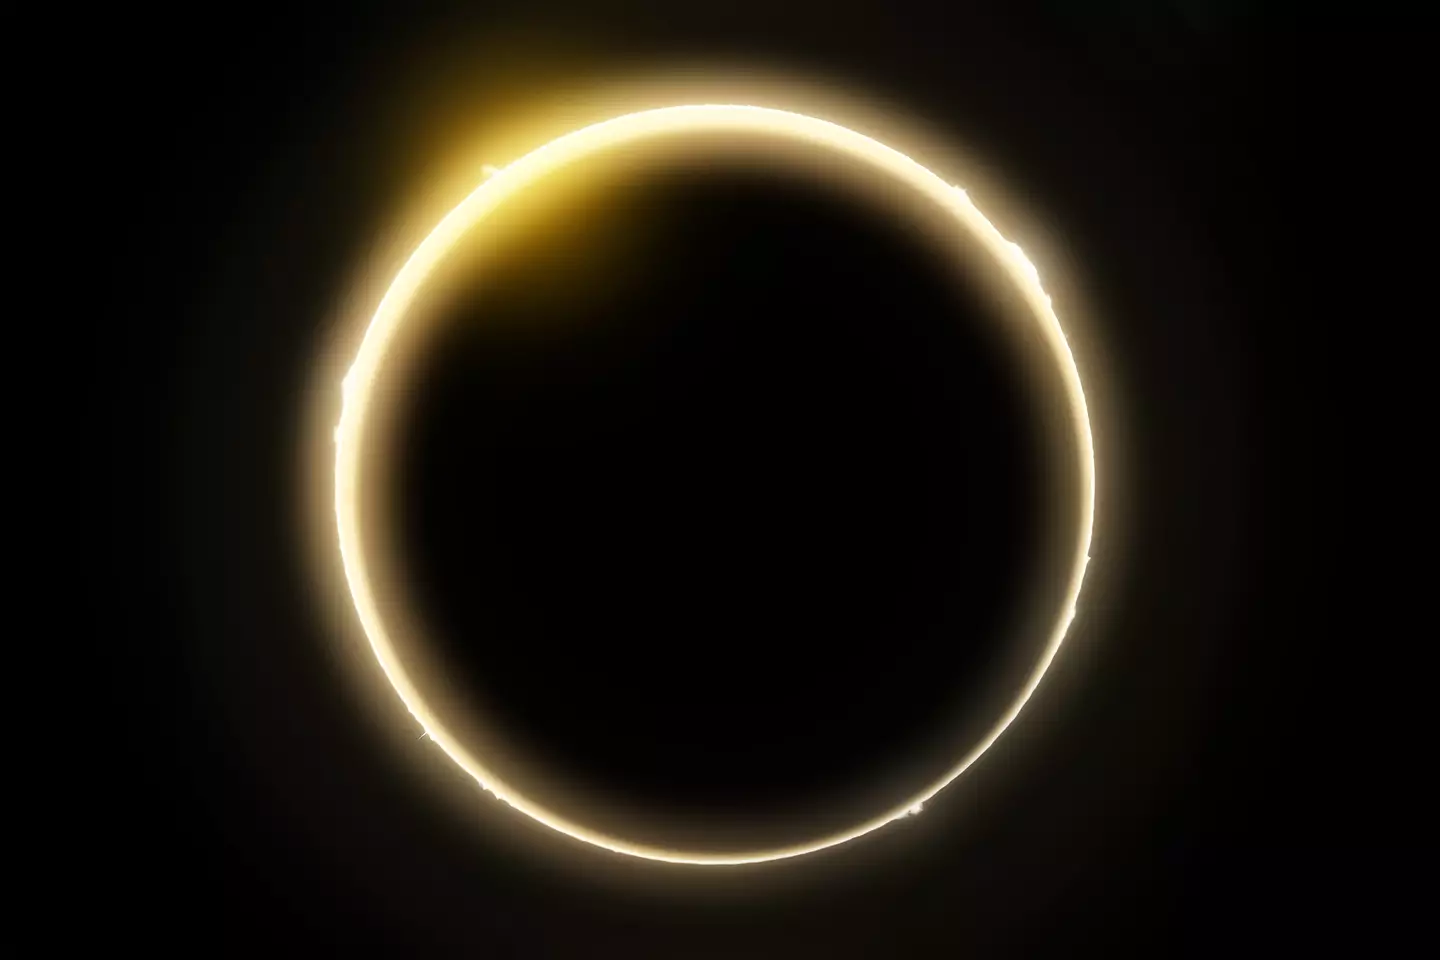 The solar eclipse is happening on 8 April.